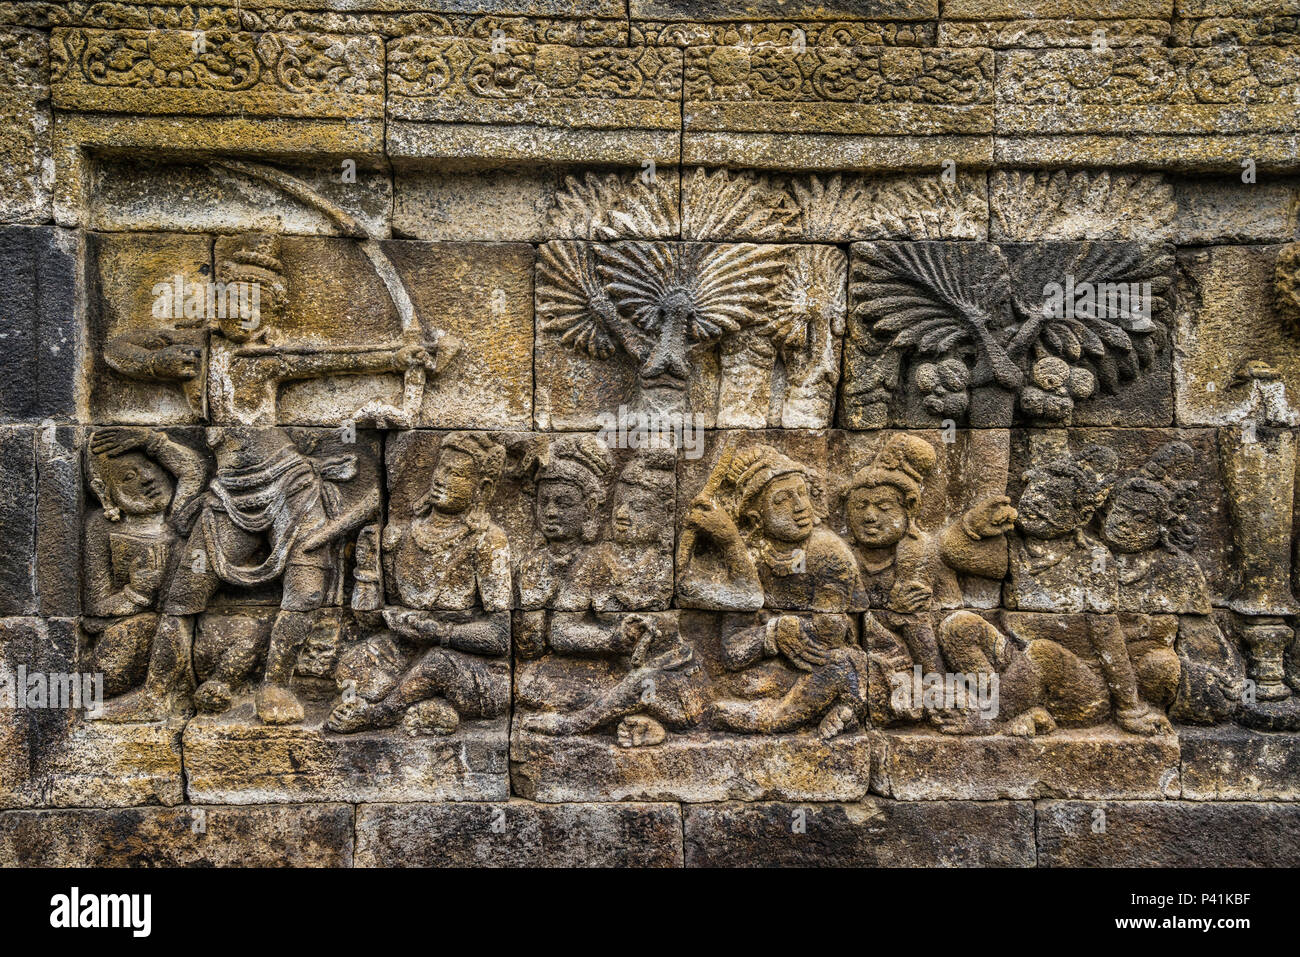 bas relief panel on a balustrade of 9th century Borobudur Buddhist temple, the approximately 2672 panels form one of the most comprehensive Buddhist n Stock Photo